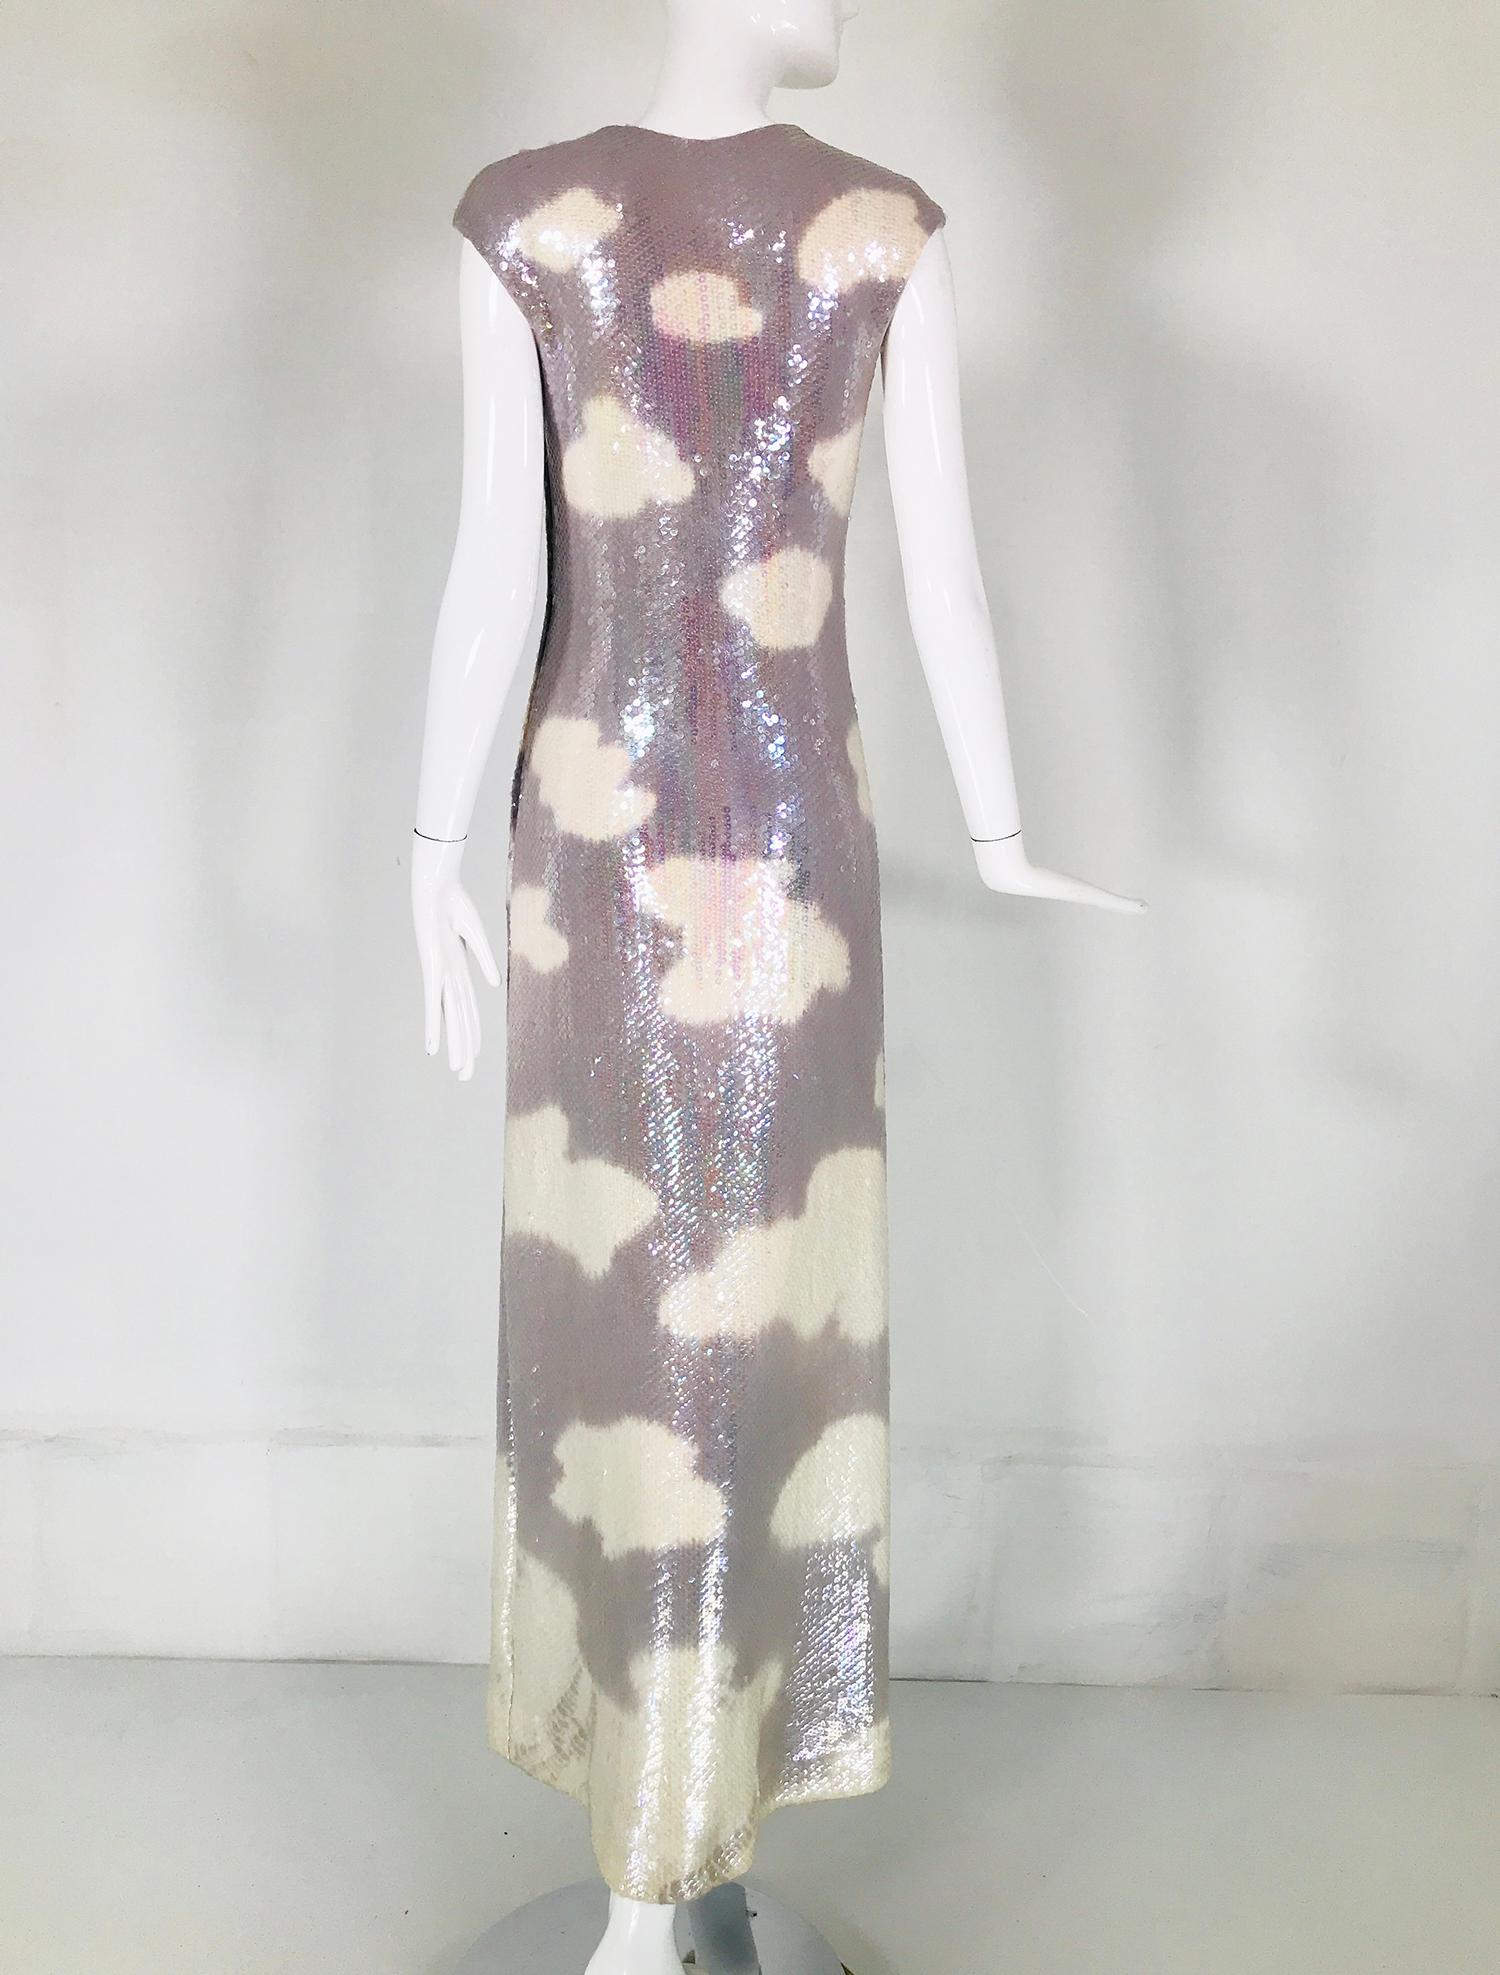 Halston Iconic Clouds Dress in Stormy Grey & Cream Iridescent Sequins Mid 1970s 3